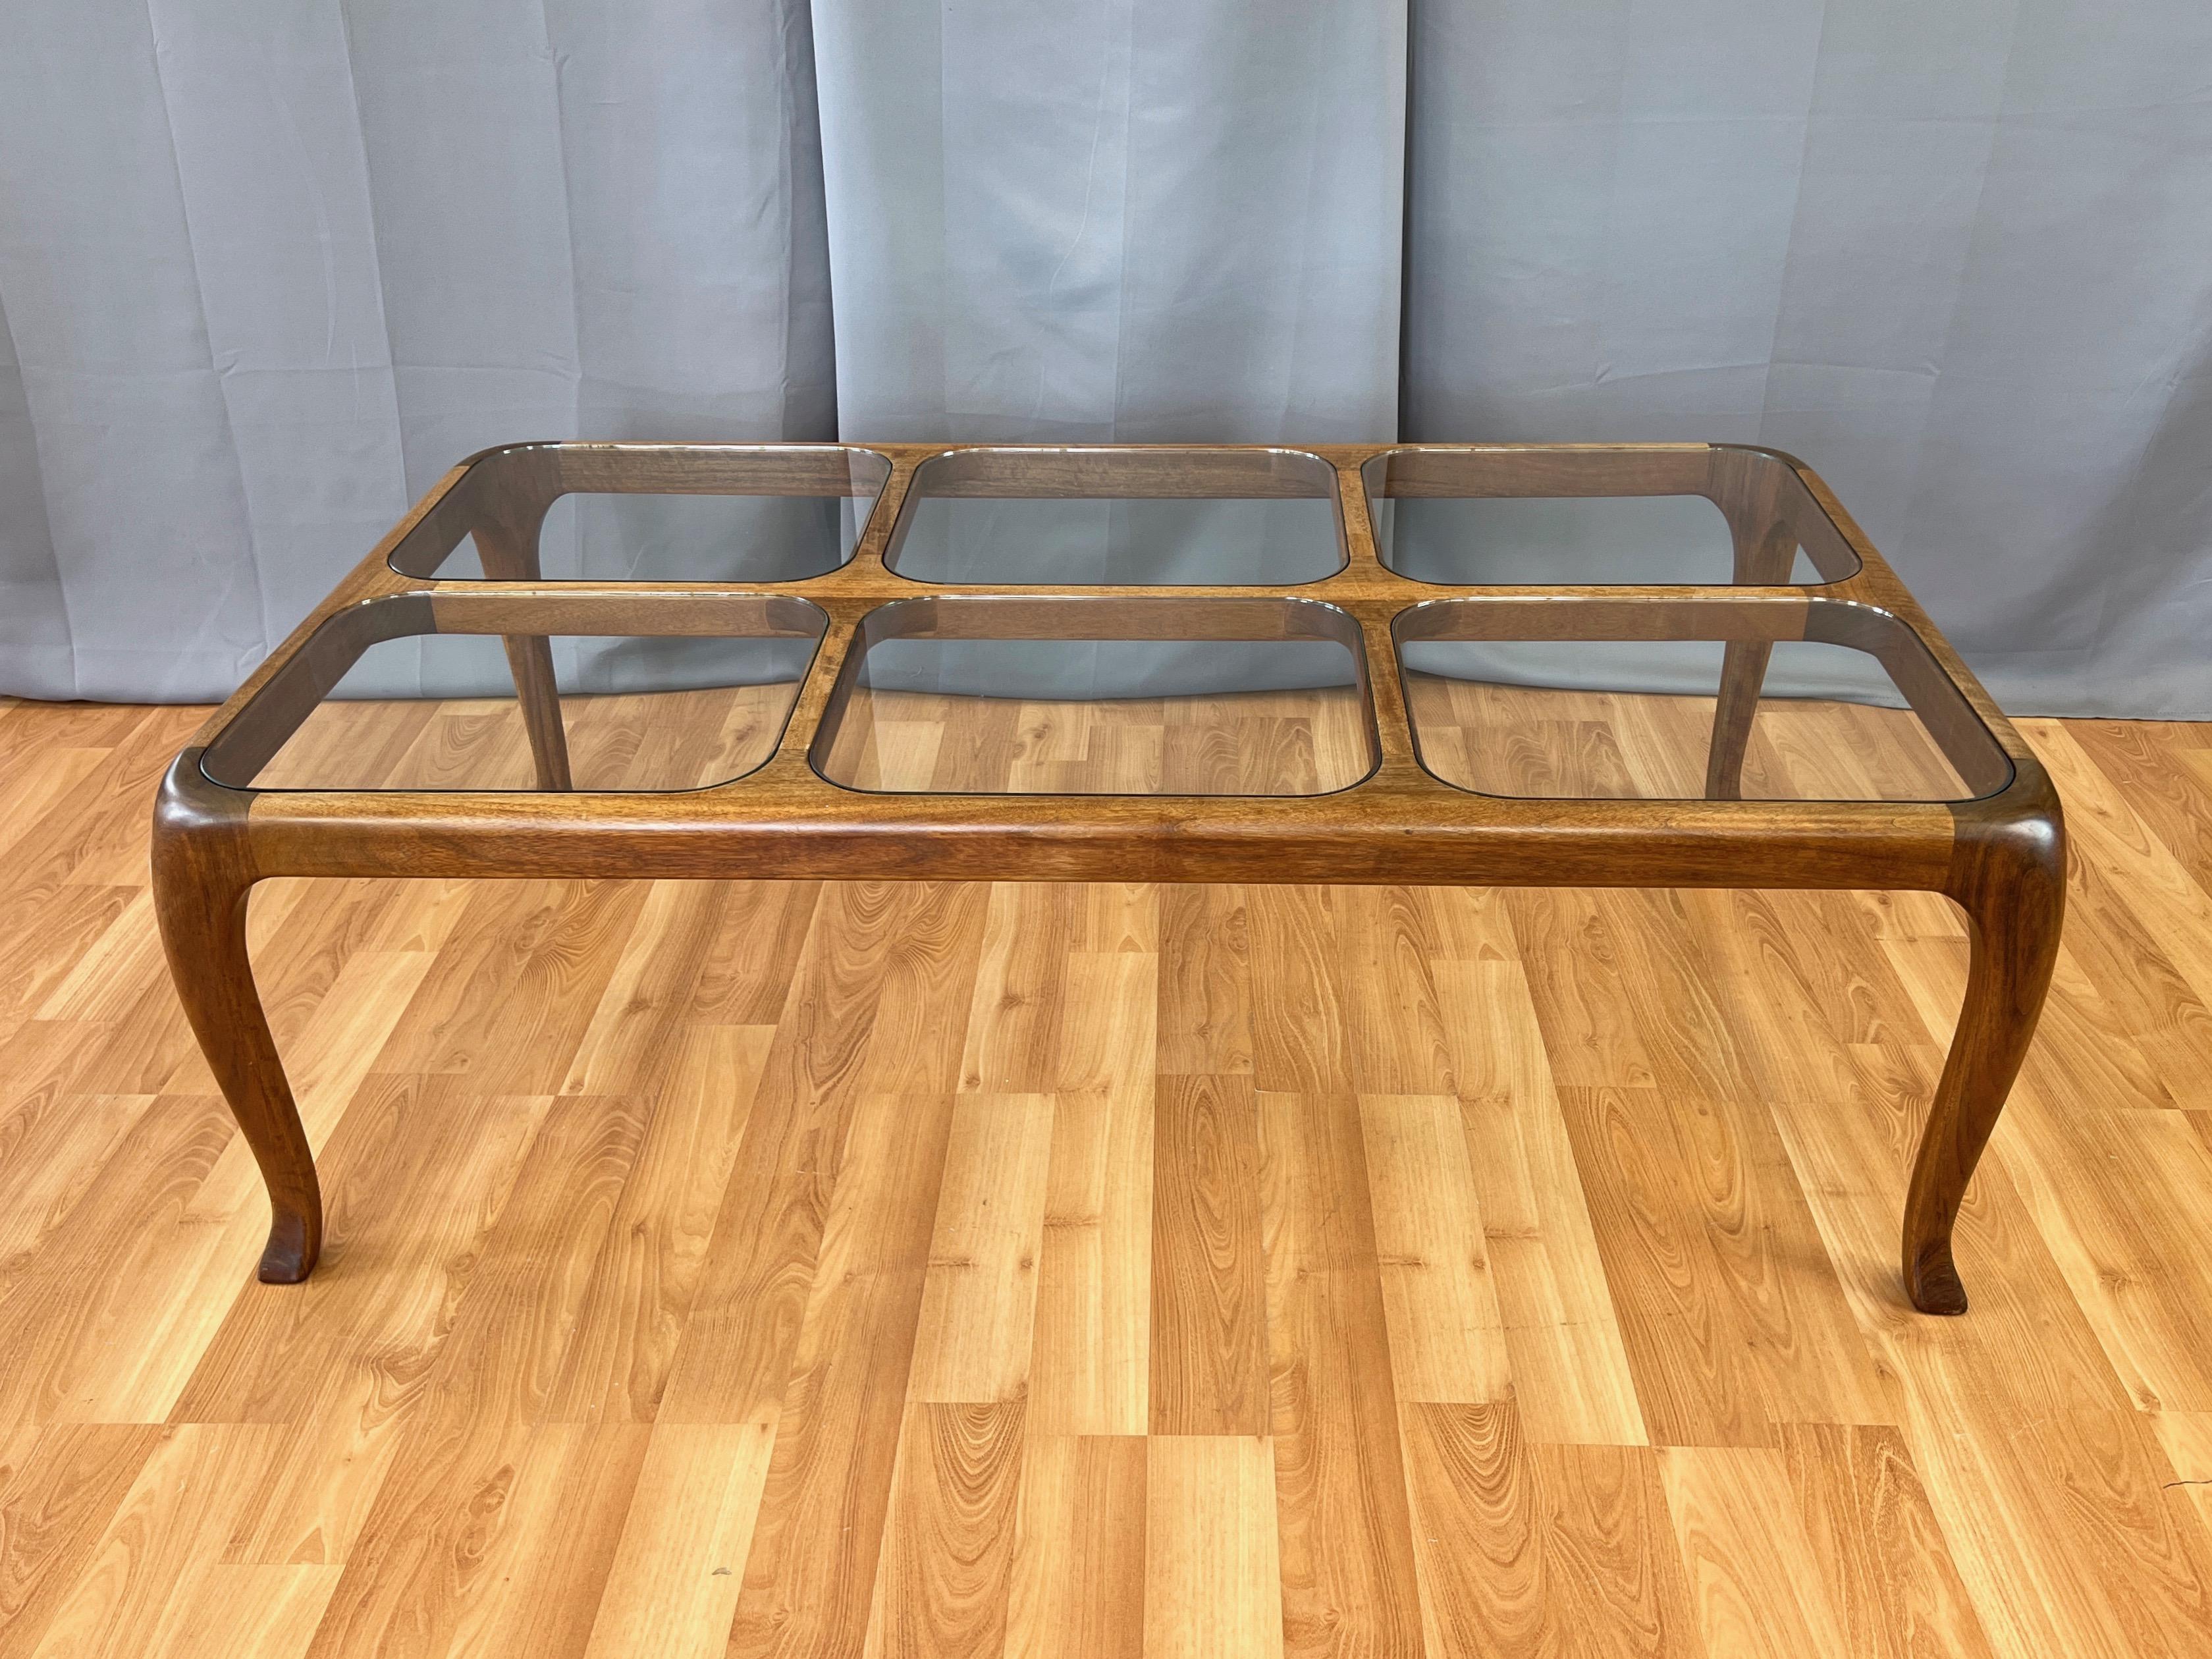 Thomas Saydah Large Walnut and Glass Coffee Table, Signed and Dated, 1982 For Sale 5